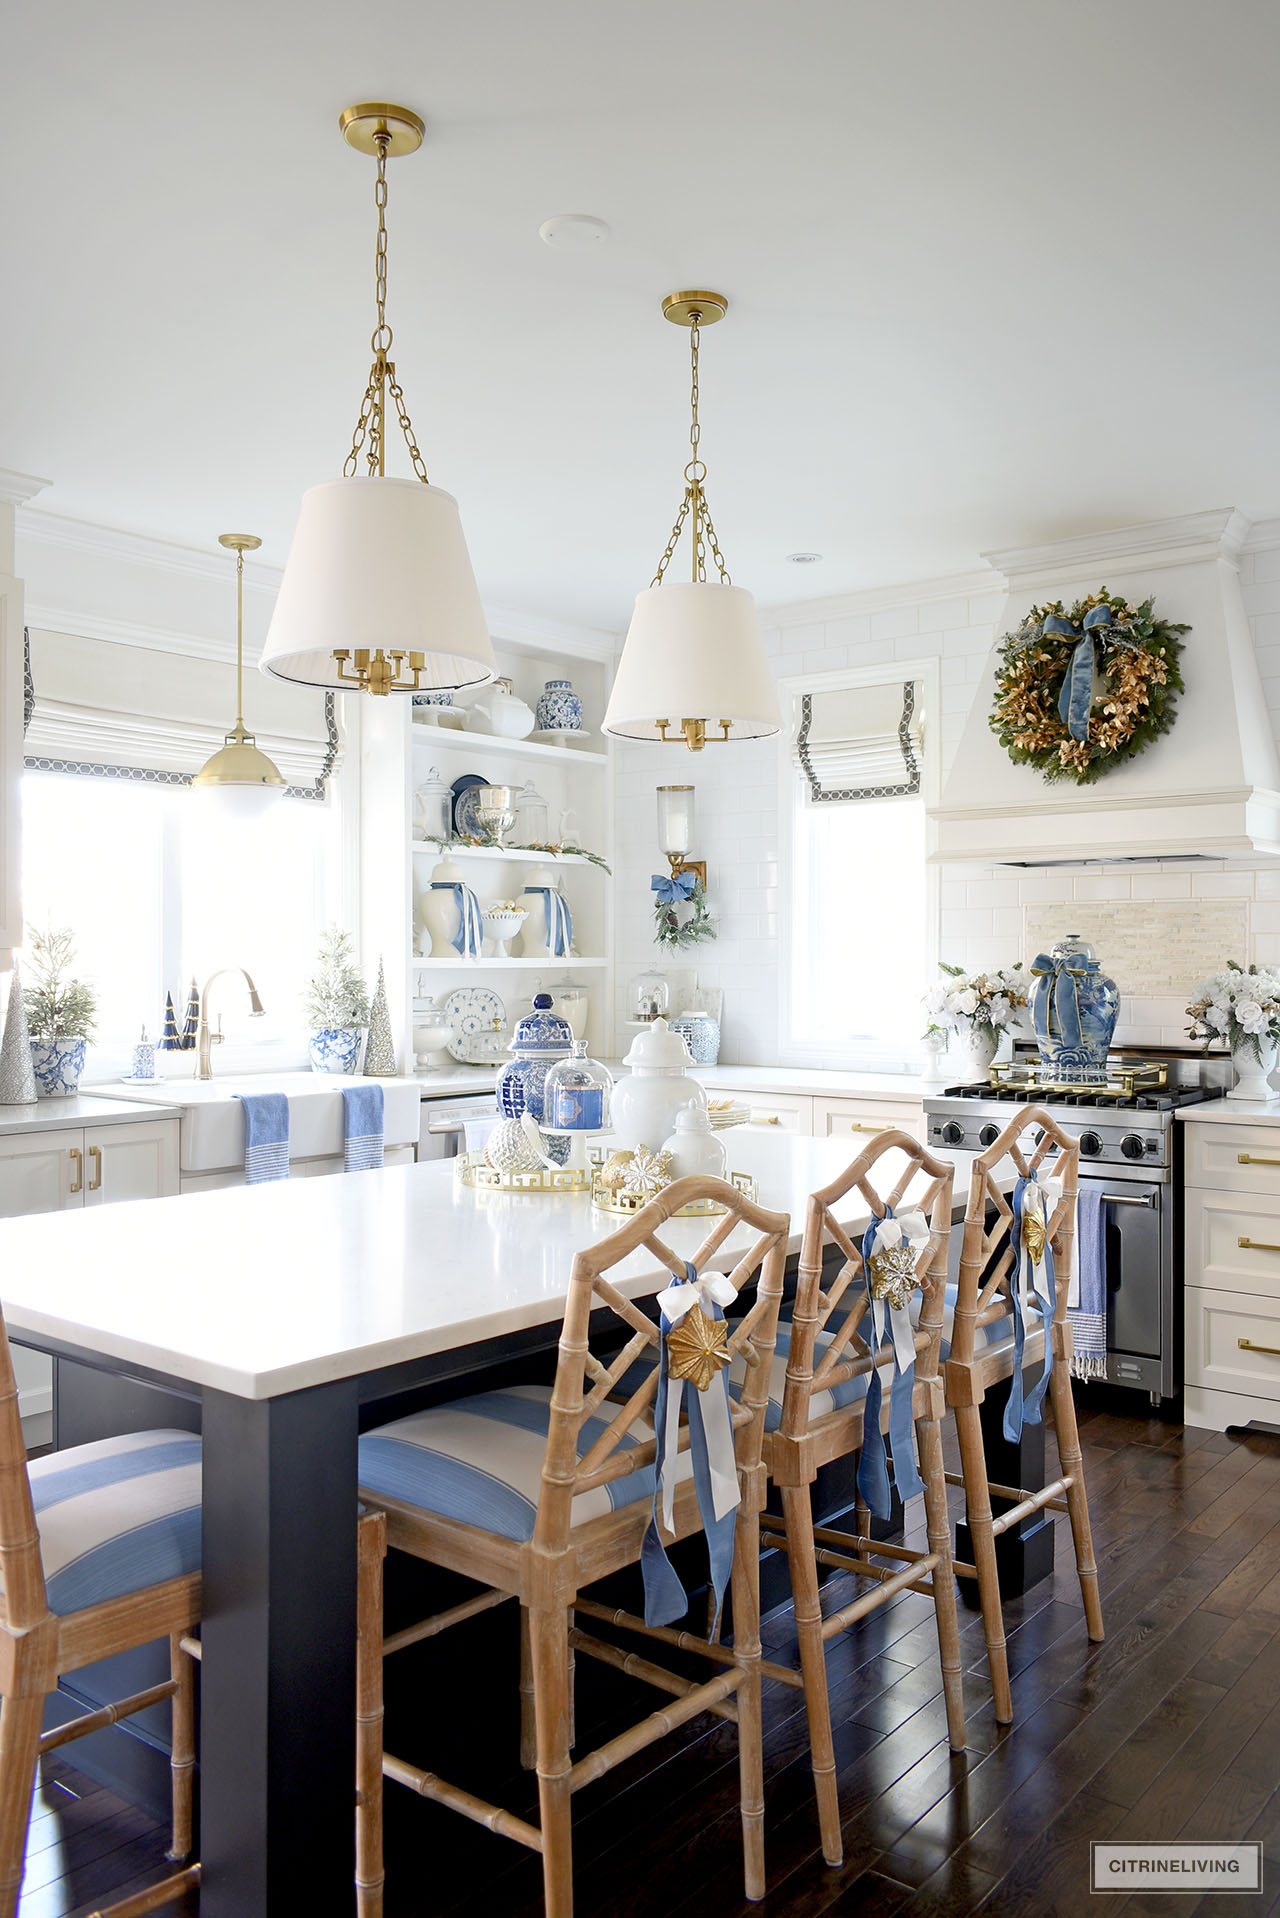 Kitchen decorated for Christmas with blue and gold and greenery touches throughout. Island barstools are styled with blue and white ribbons and gold ornaments tied on the back.